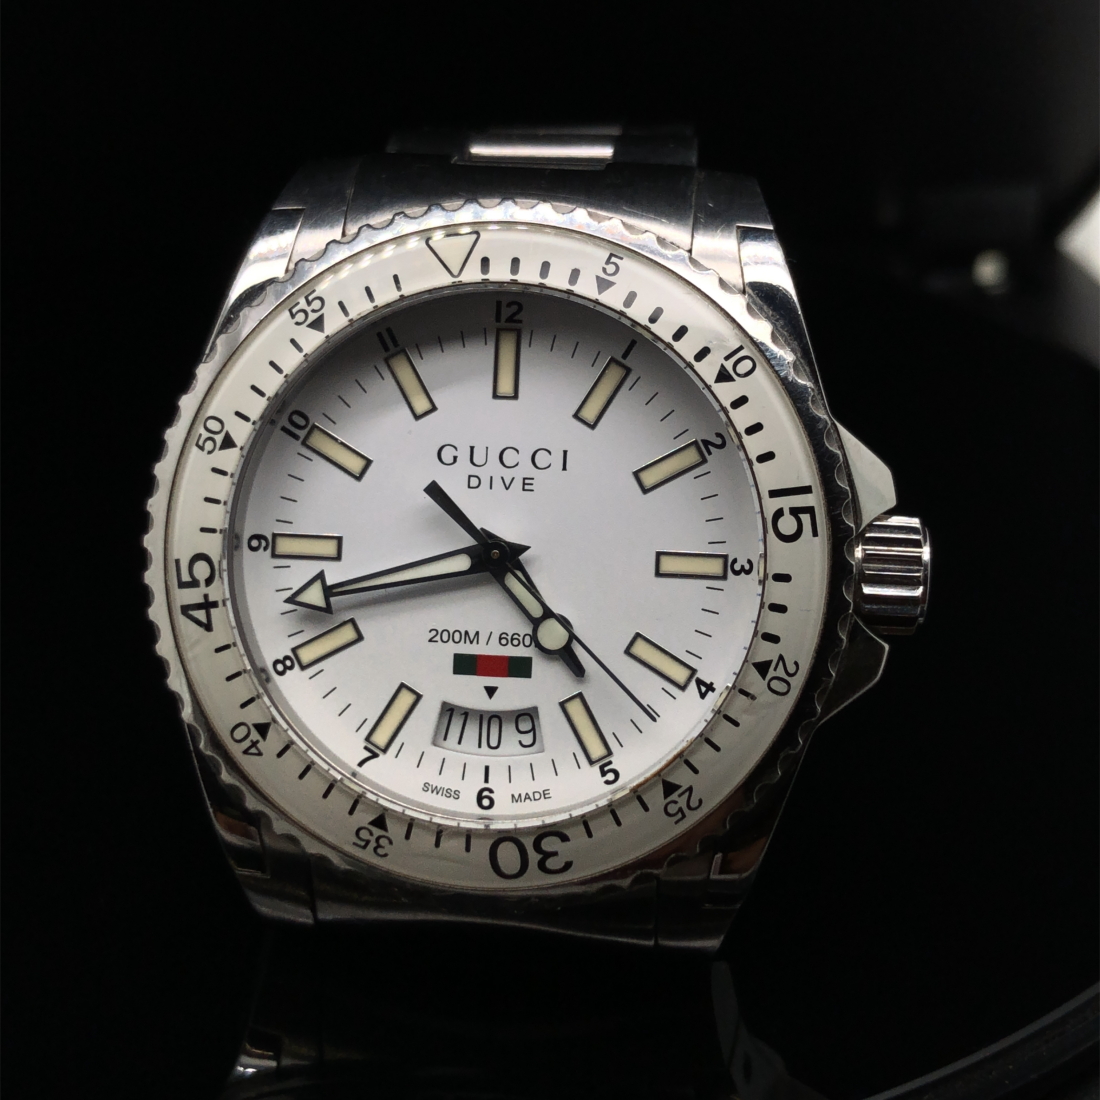 A GUCCI DIVE WATCH, WHITE DIAL AND BATONS, ON A STAINLESS STEEL BRACELET STRAP WITH A BUTTERFLY - Image 2 of 6